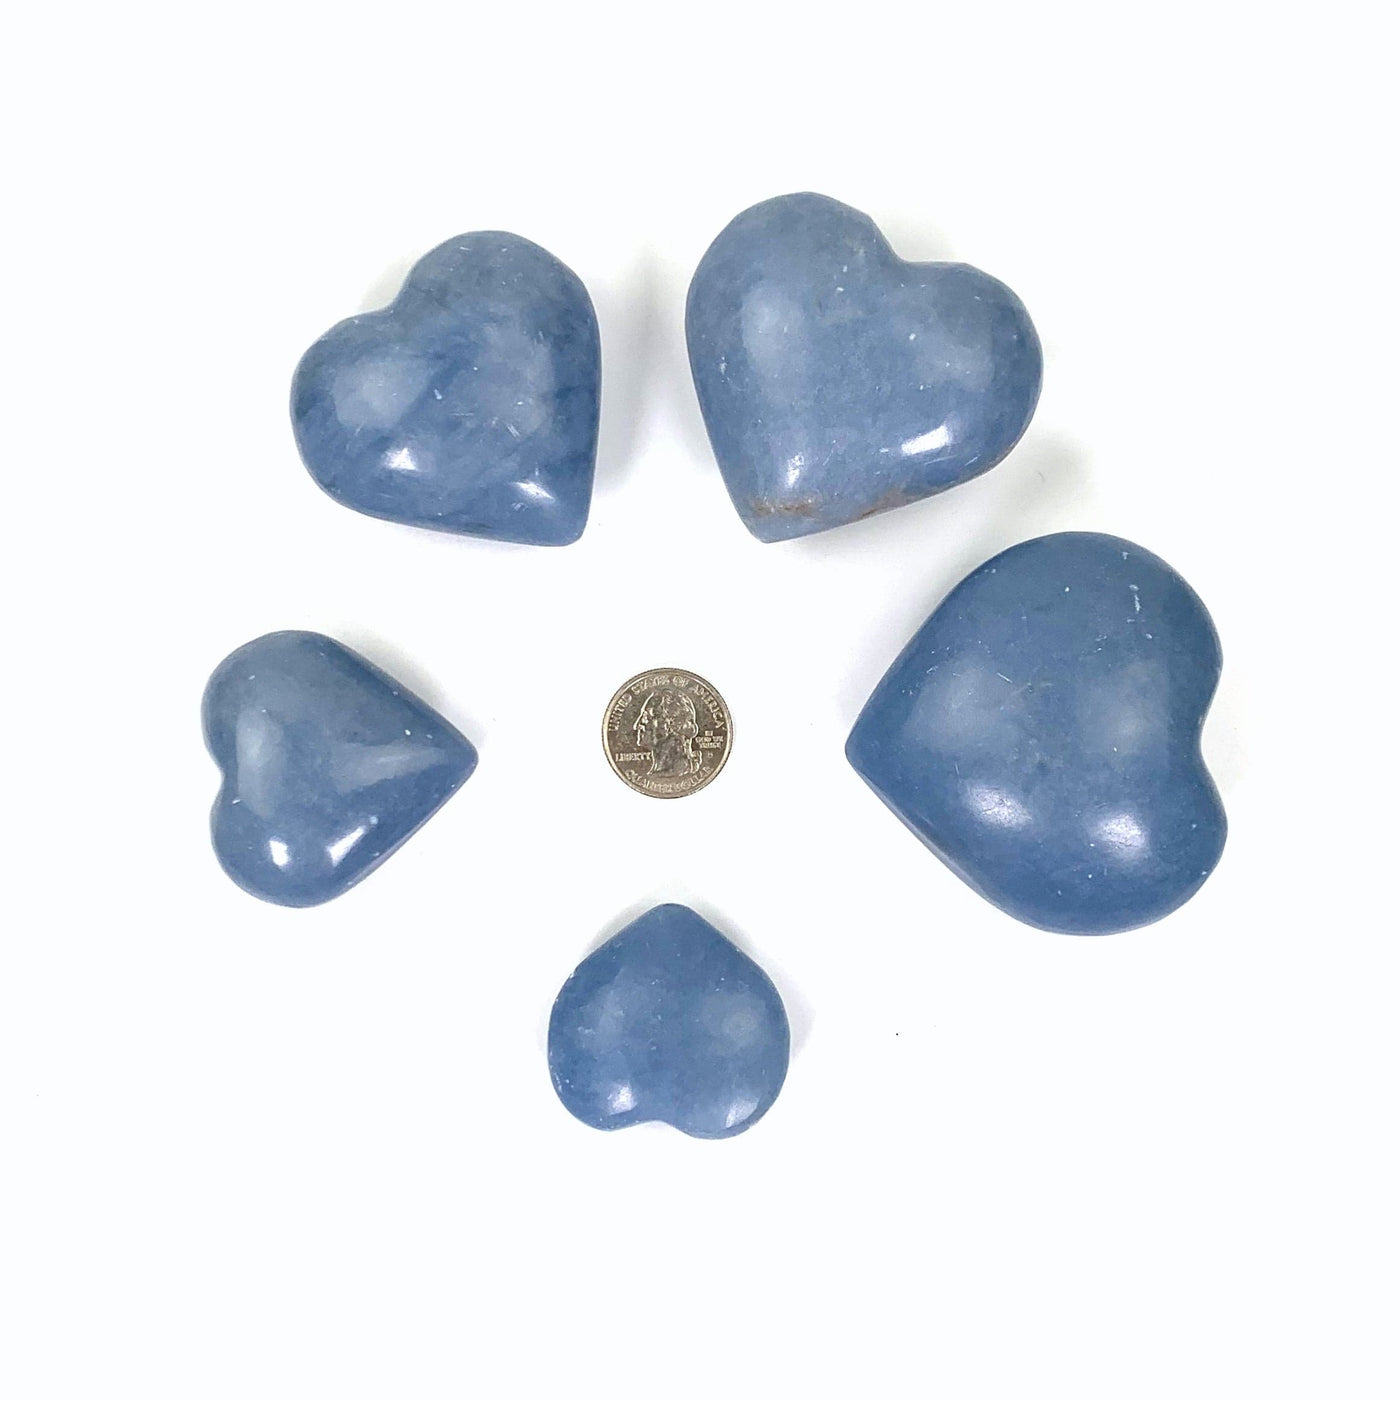 the 5 angelite size hearts surrounding a quarter for sizing reference